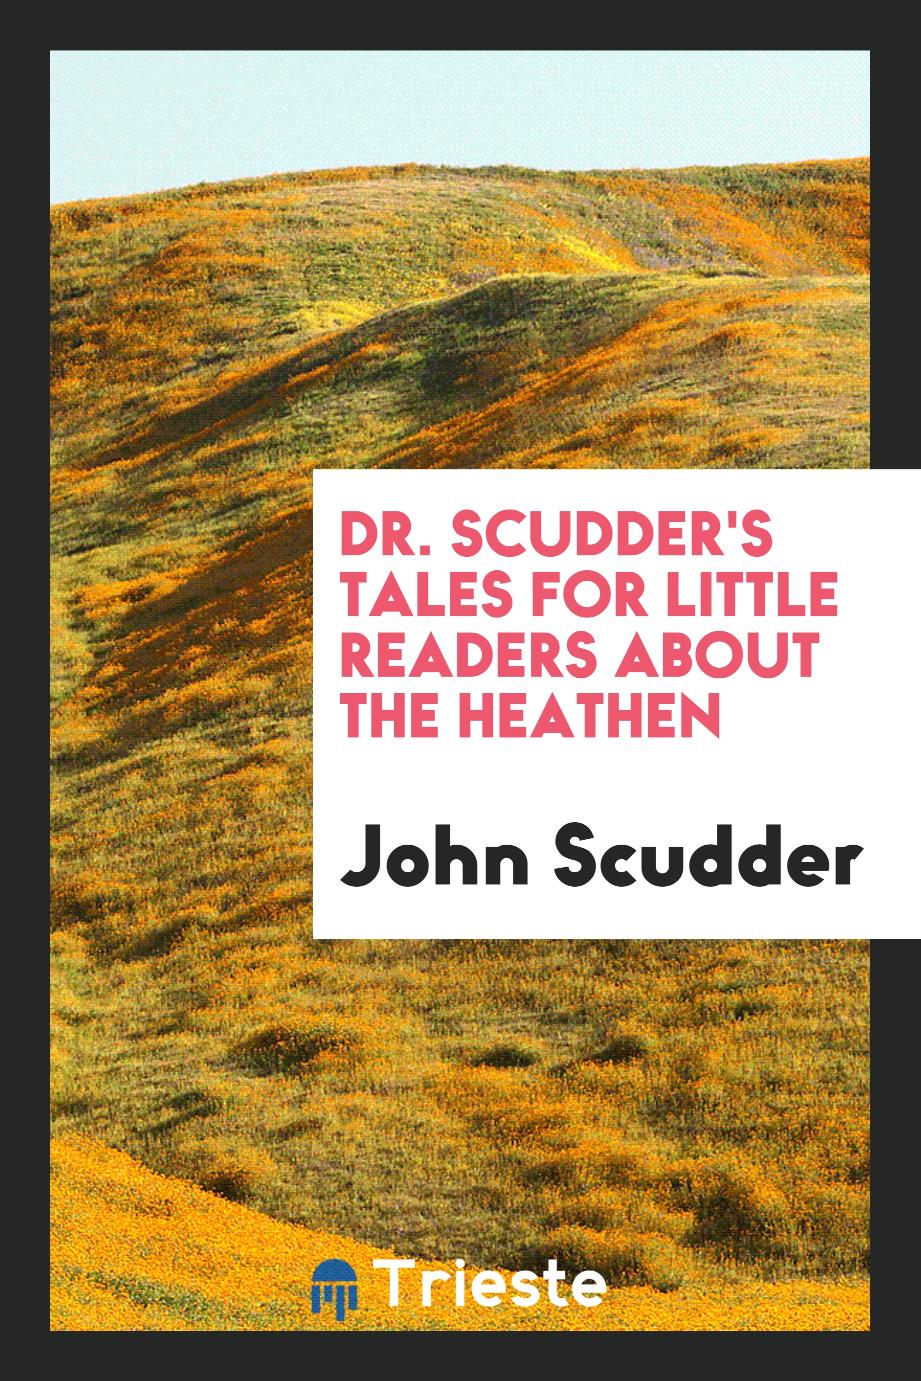 Dr. Scudder's tales for little readers about the heathen